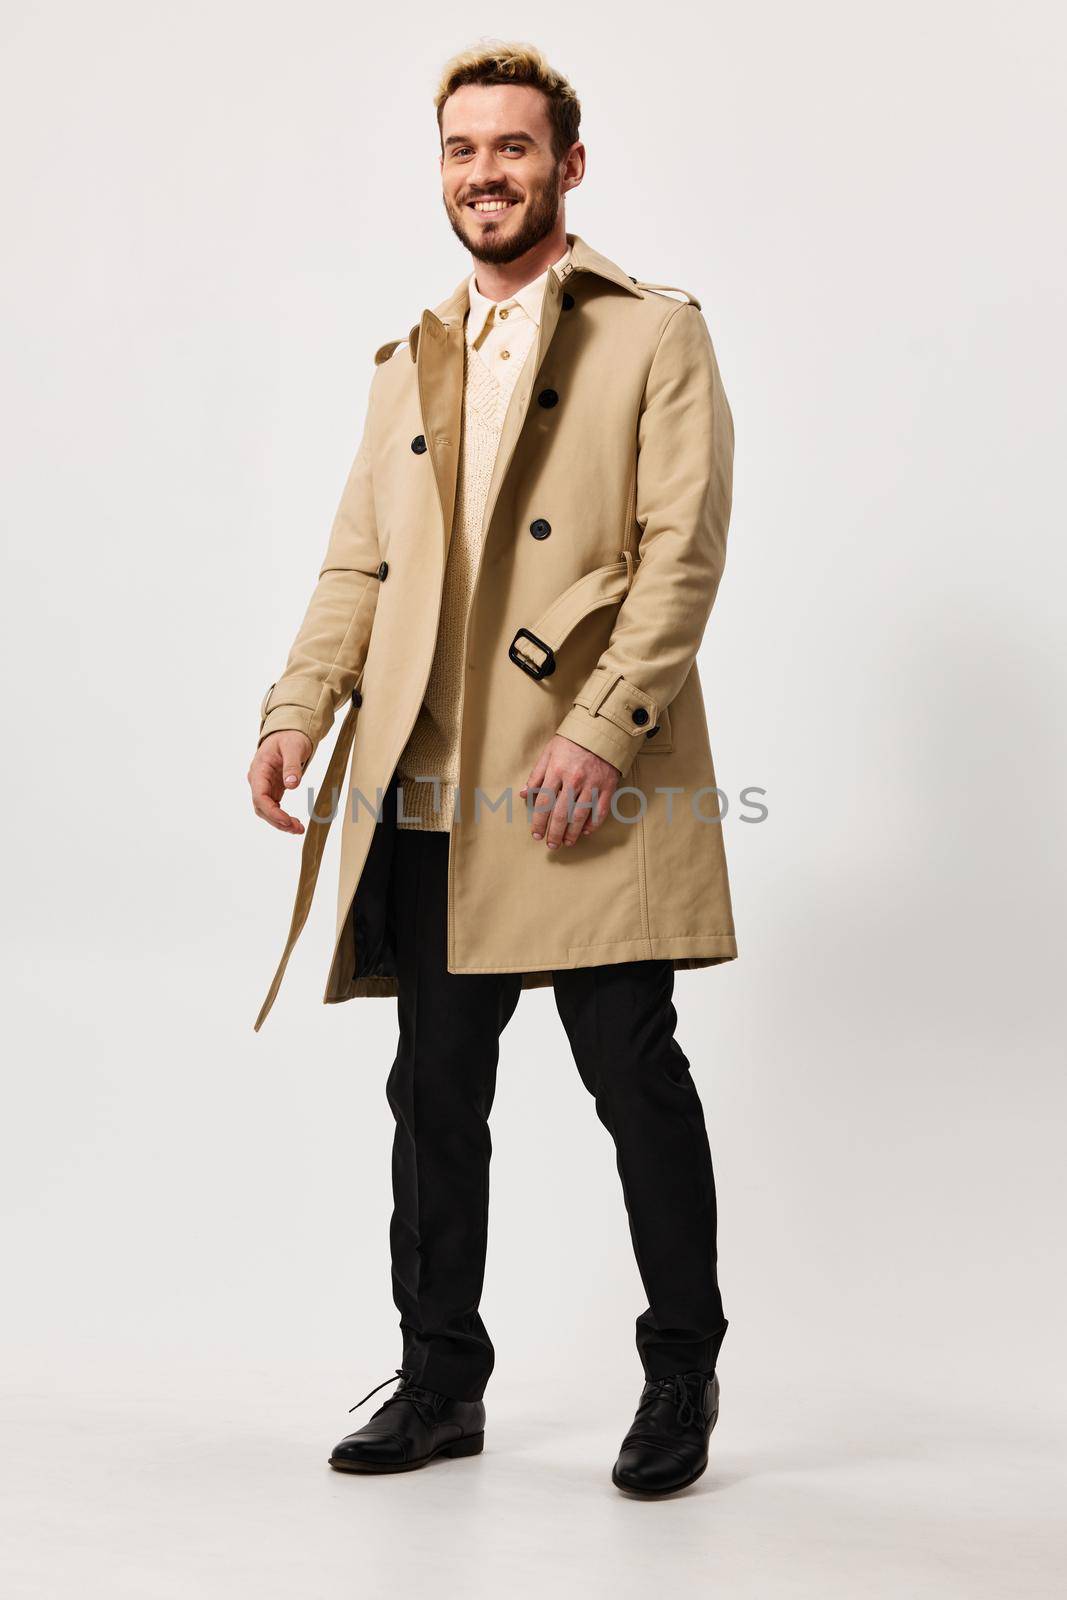 cute guy in beige coat and trousers goes to the side on a light background and fashion style suit by SHOTPRIME